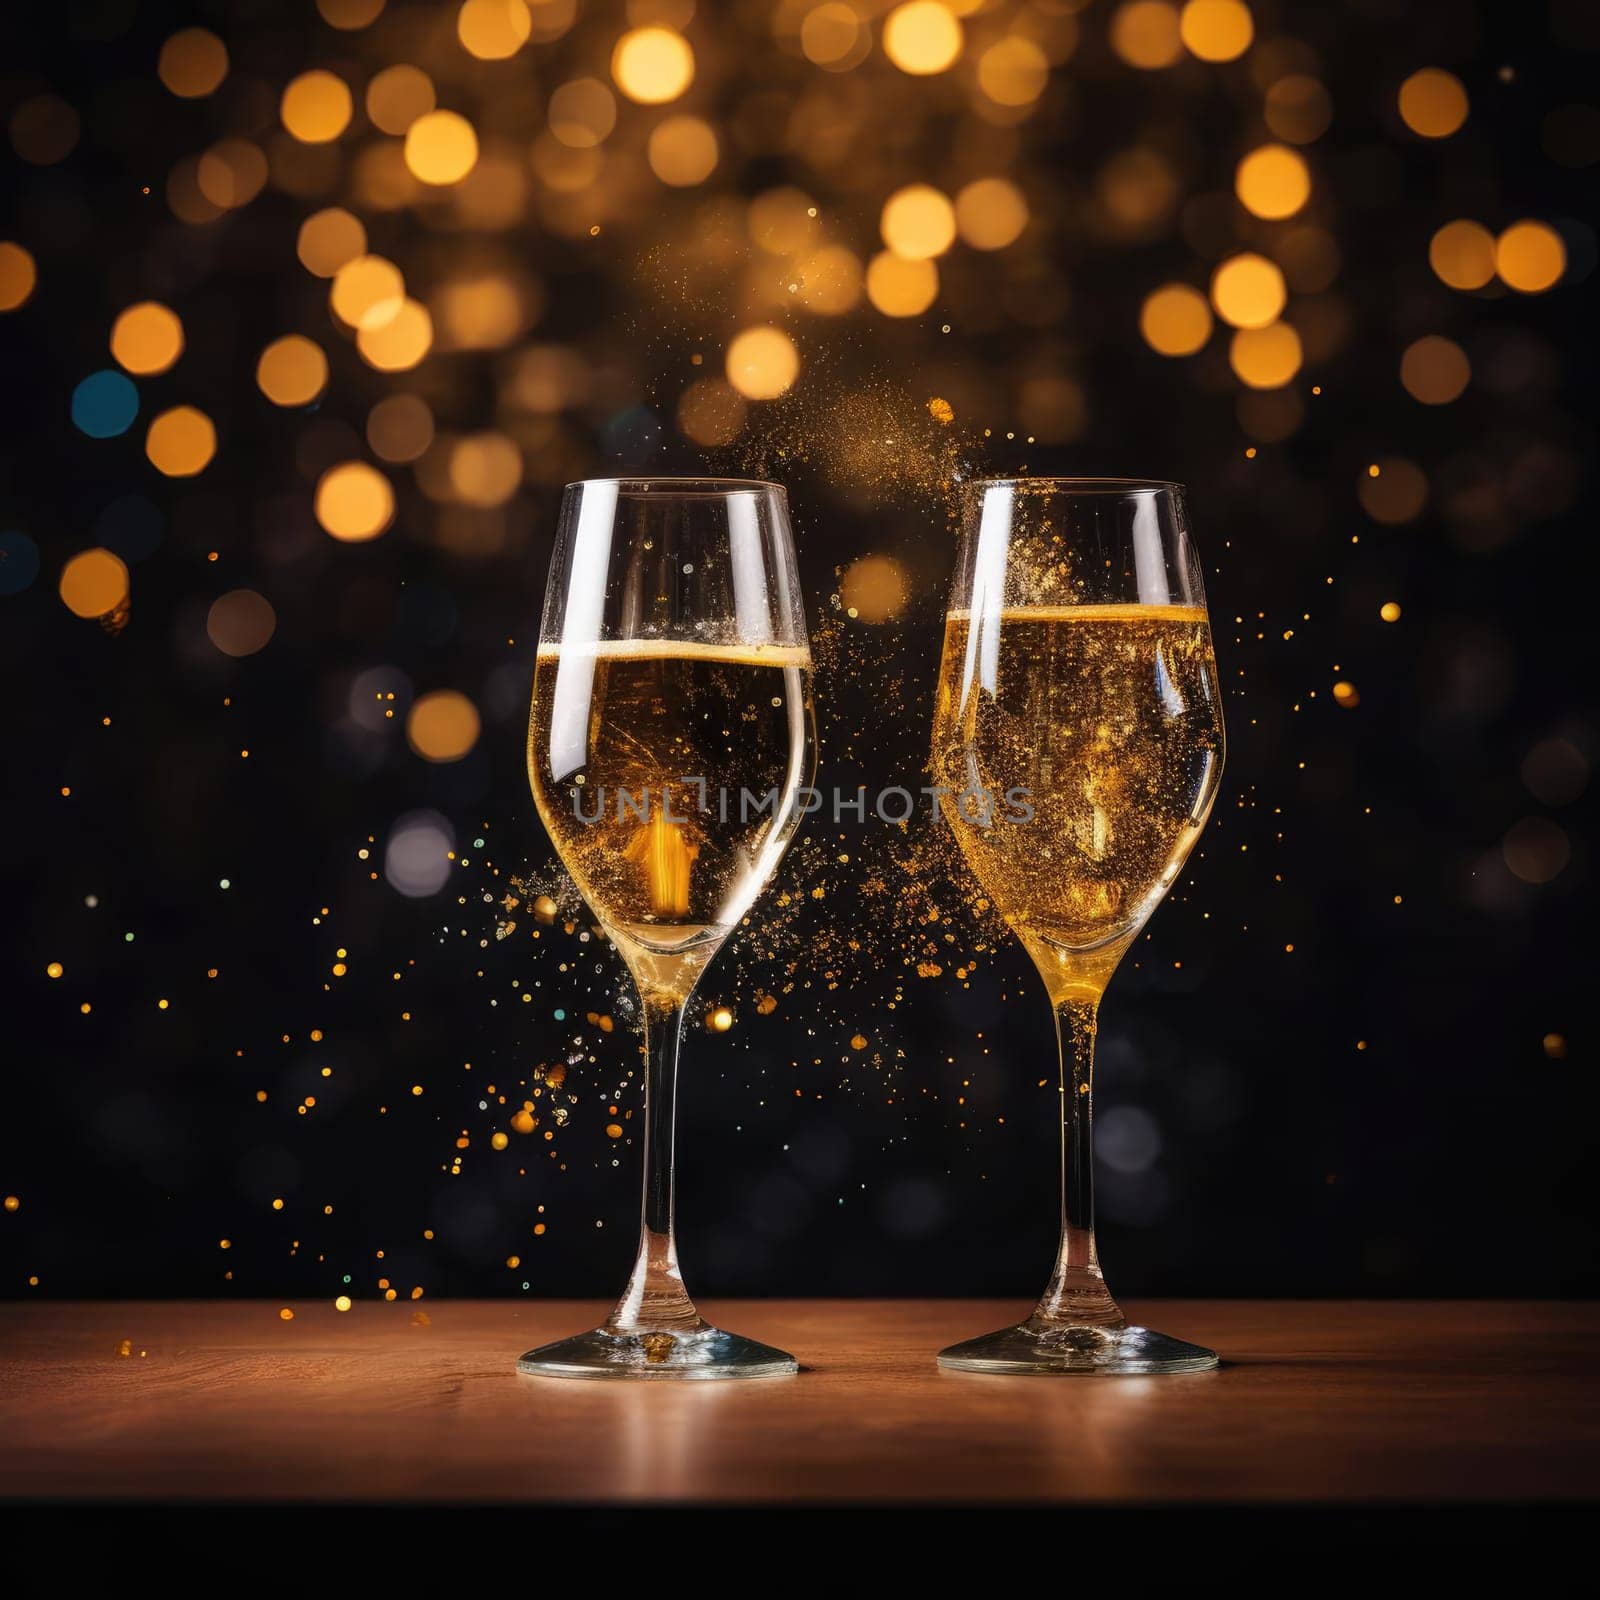 Two glasses of champagne on a blurred background with a golden hue